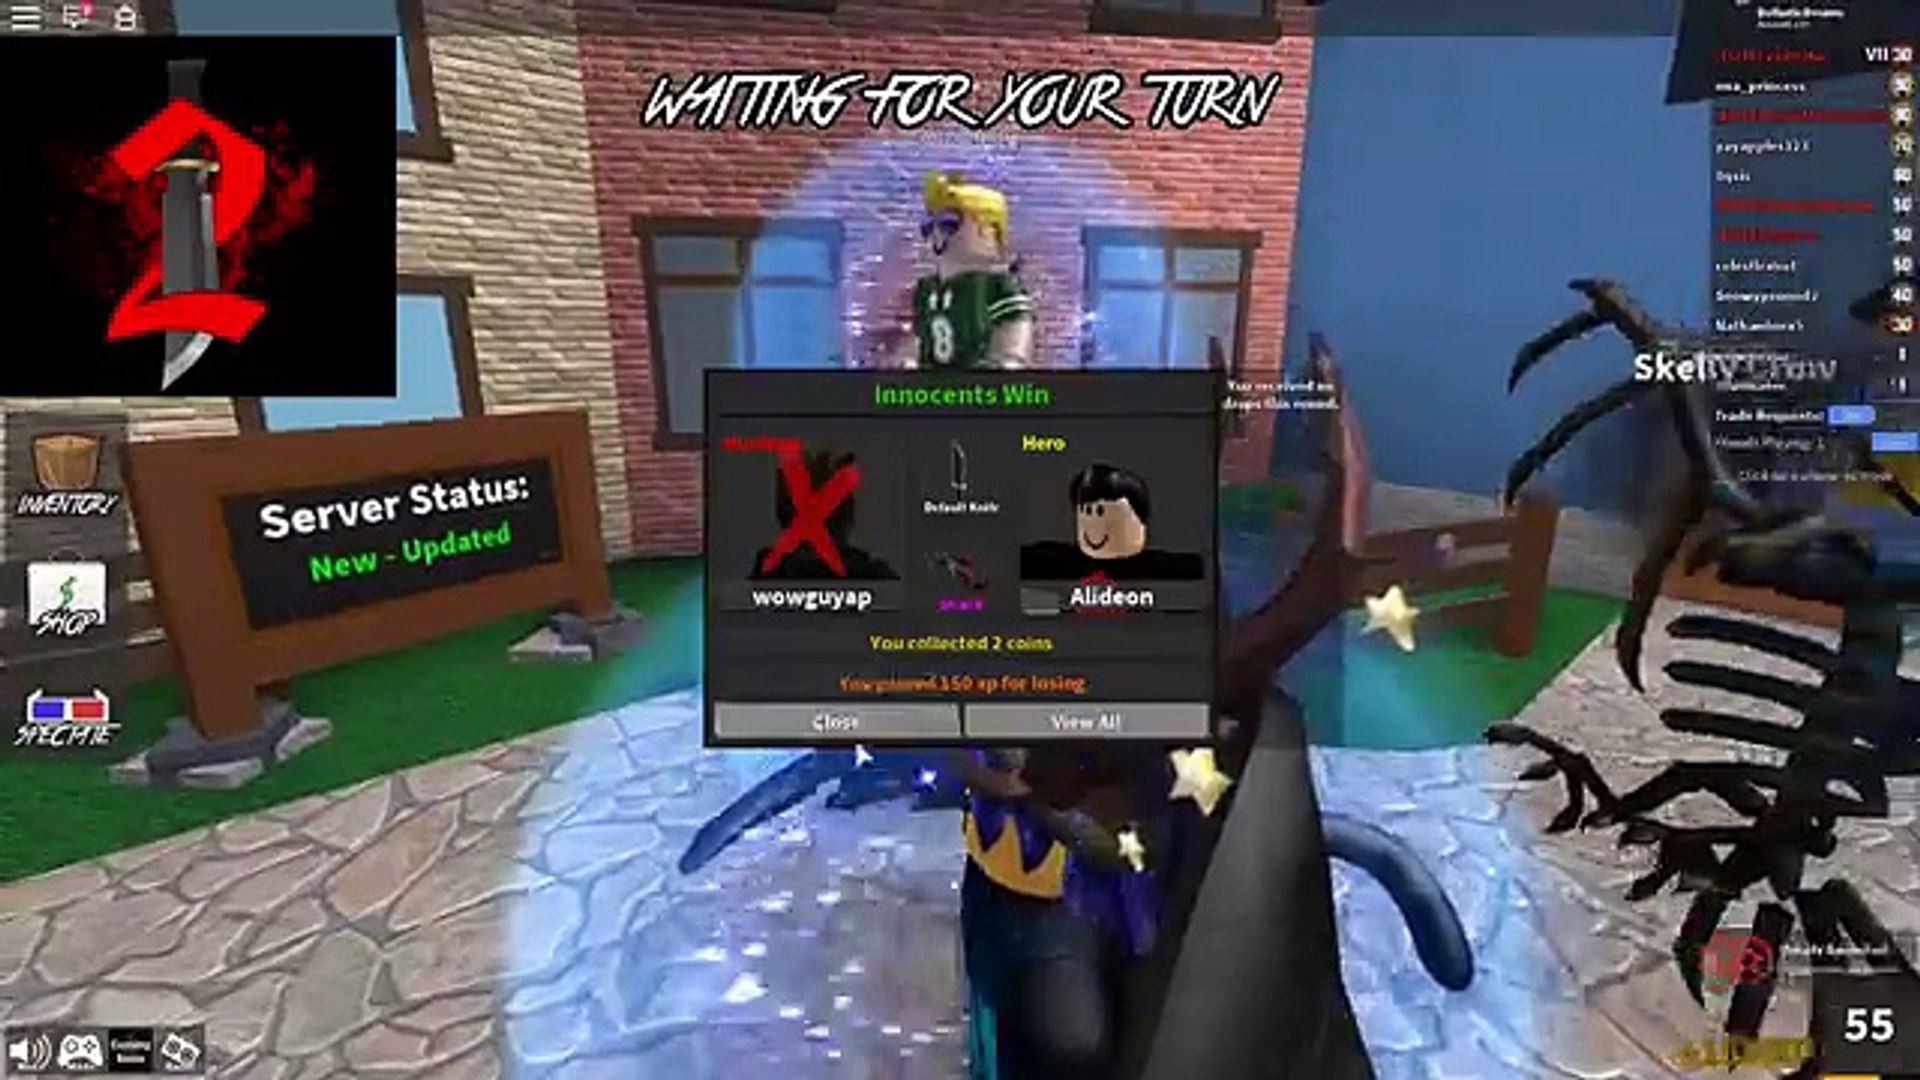 New Police Office Map Roblox Murder Mystery 2 With Gamer Chad Dollastic Plays Video Dailymotion - roblox murderer mystery 2 dollastic plays